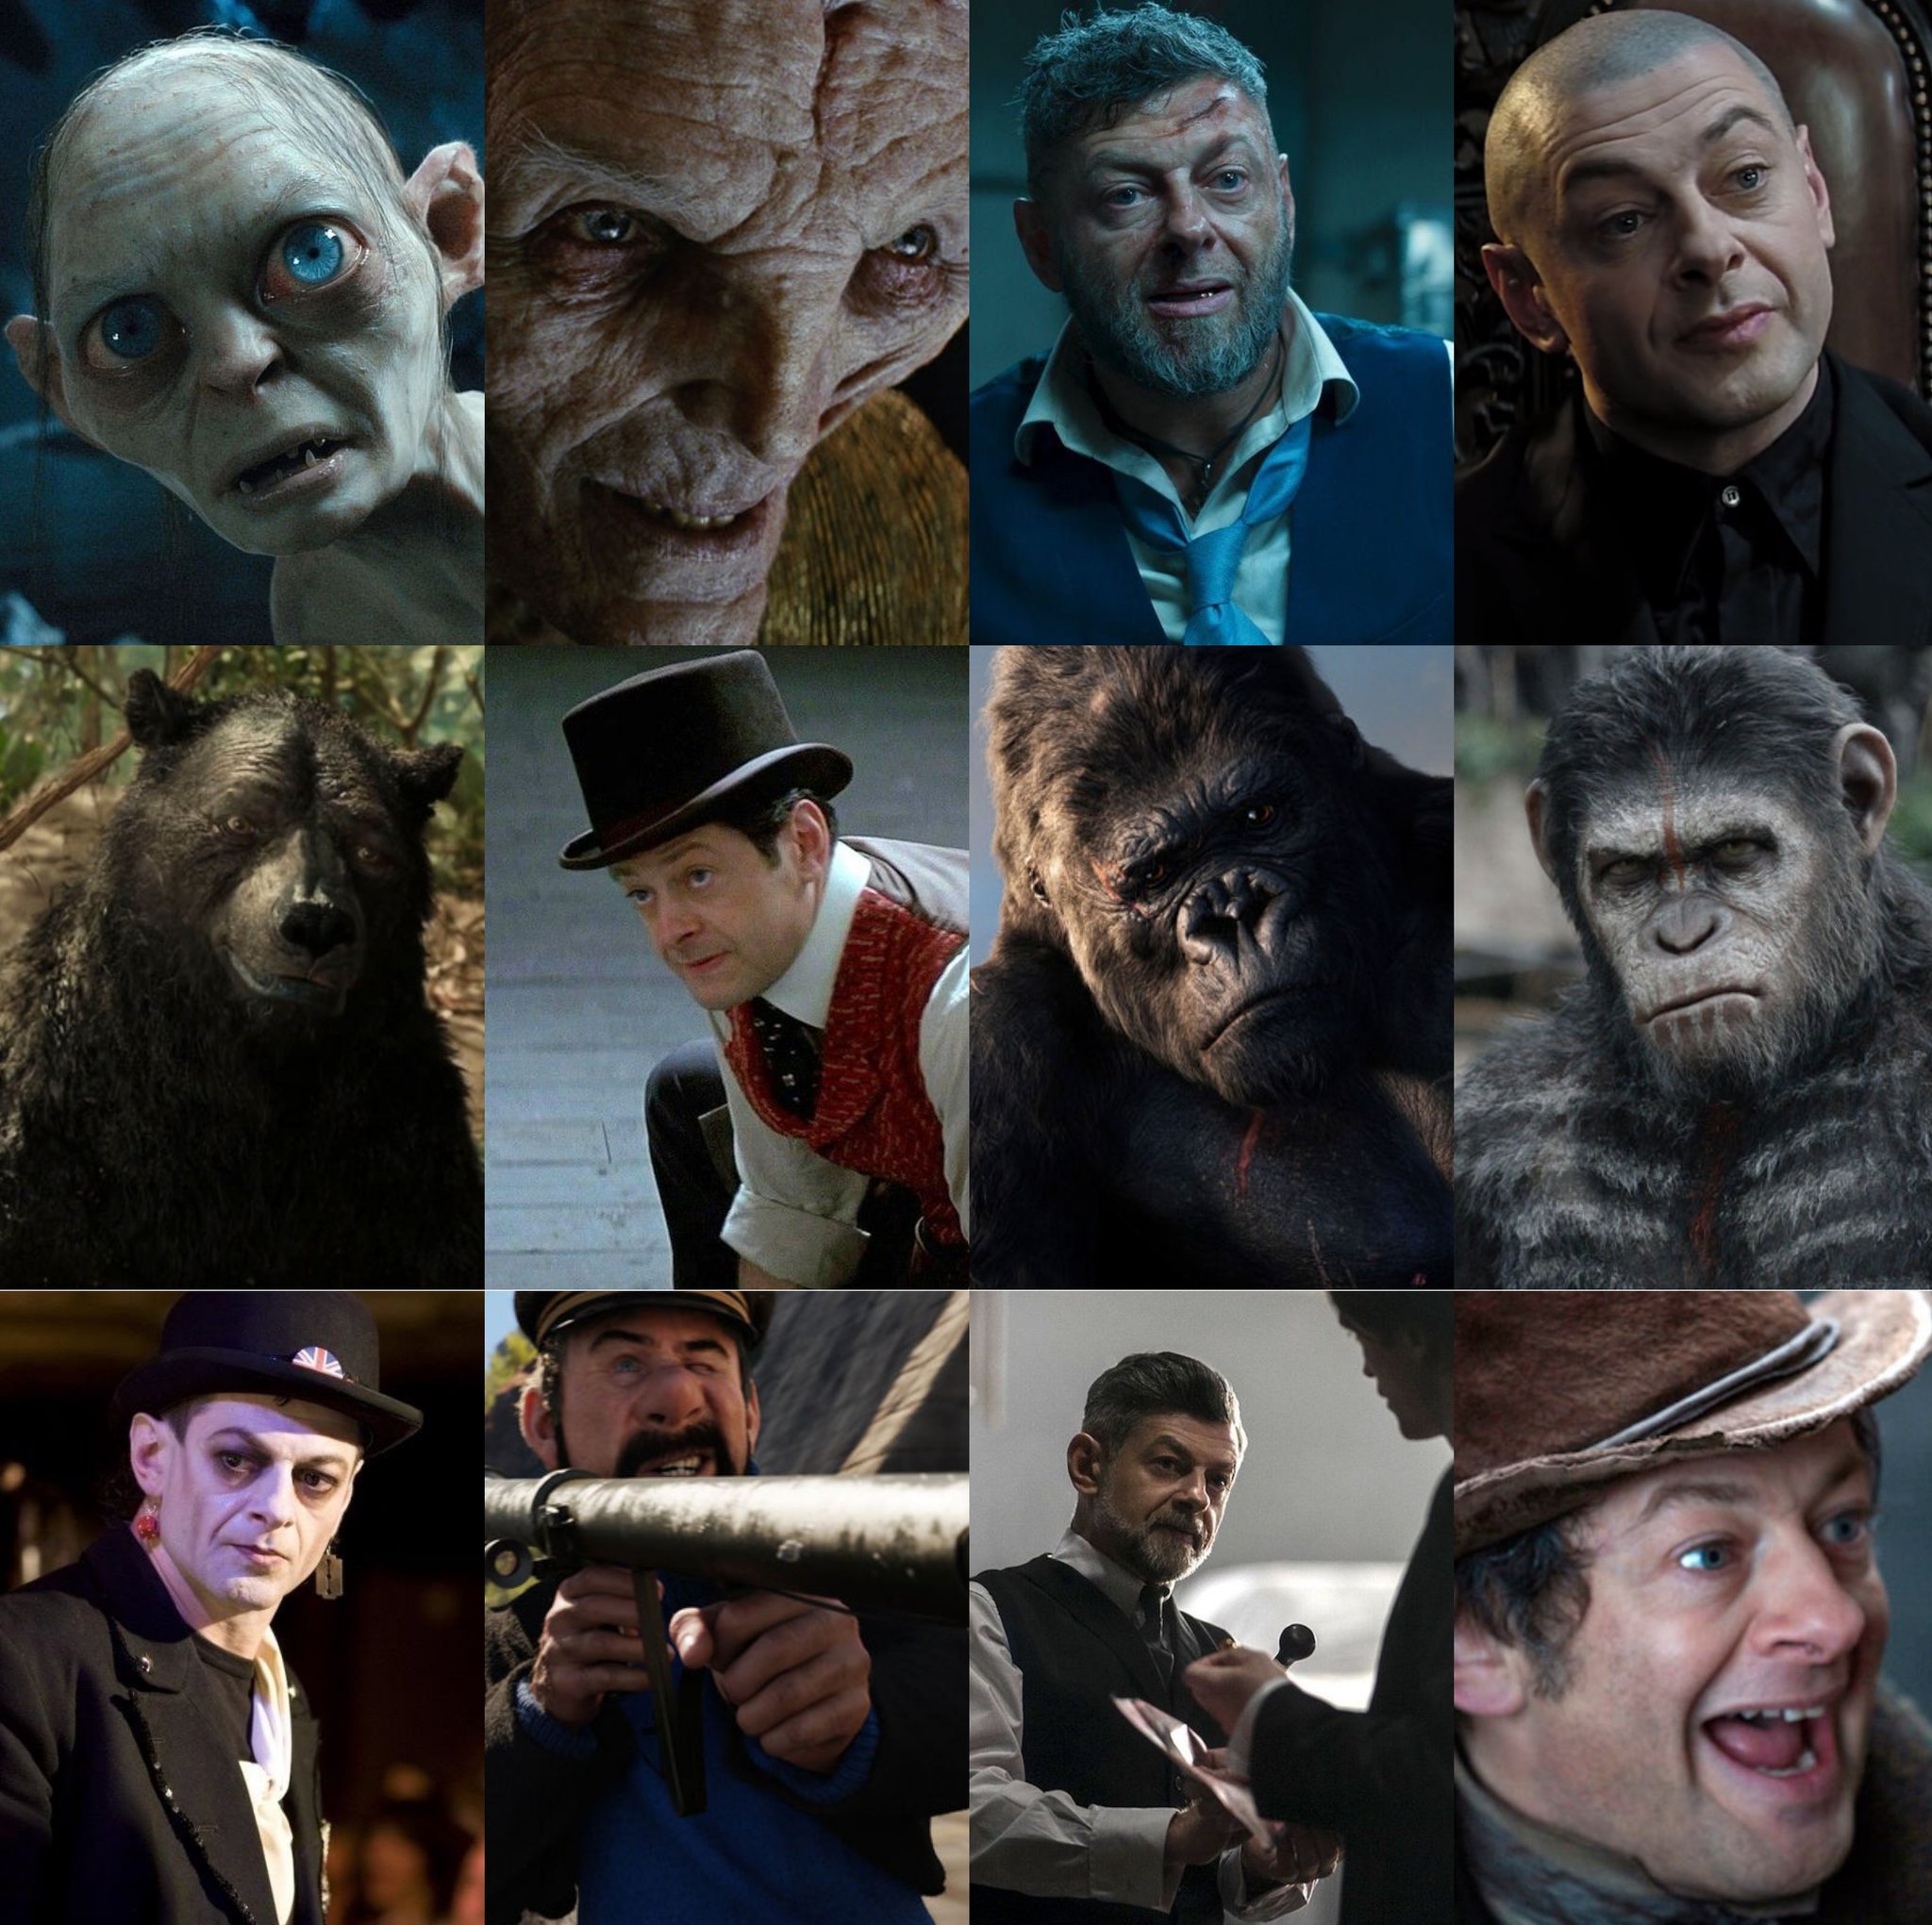 Happy 58th birthday to Andy Serkis! He\s undoubtedly a Hollywood pioneer and the King of Motion Capture. 